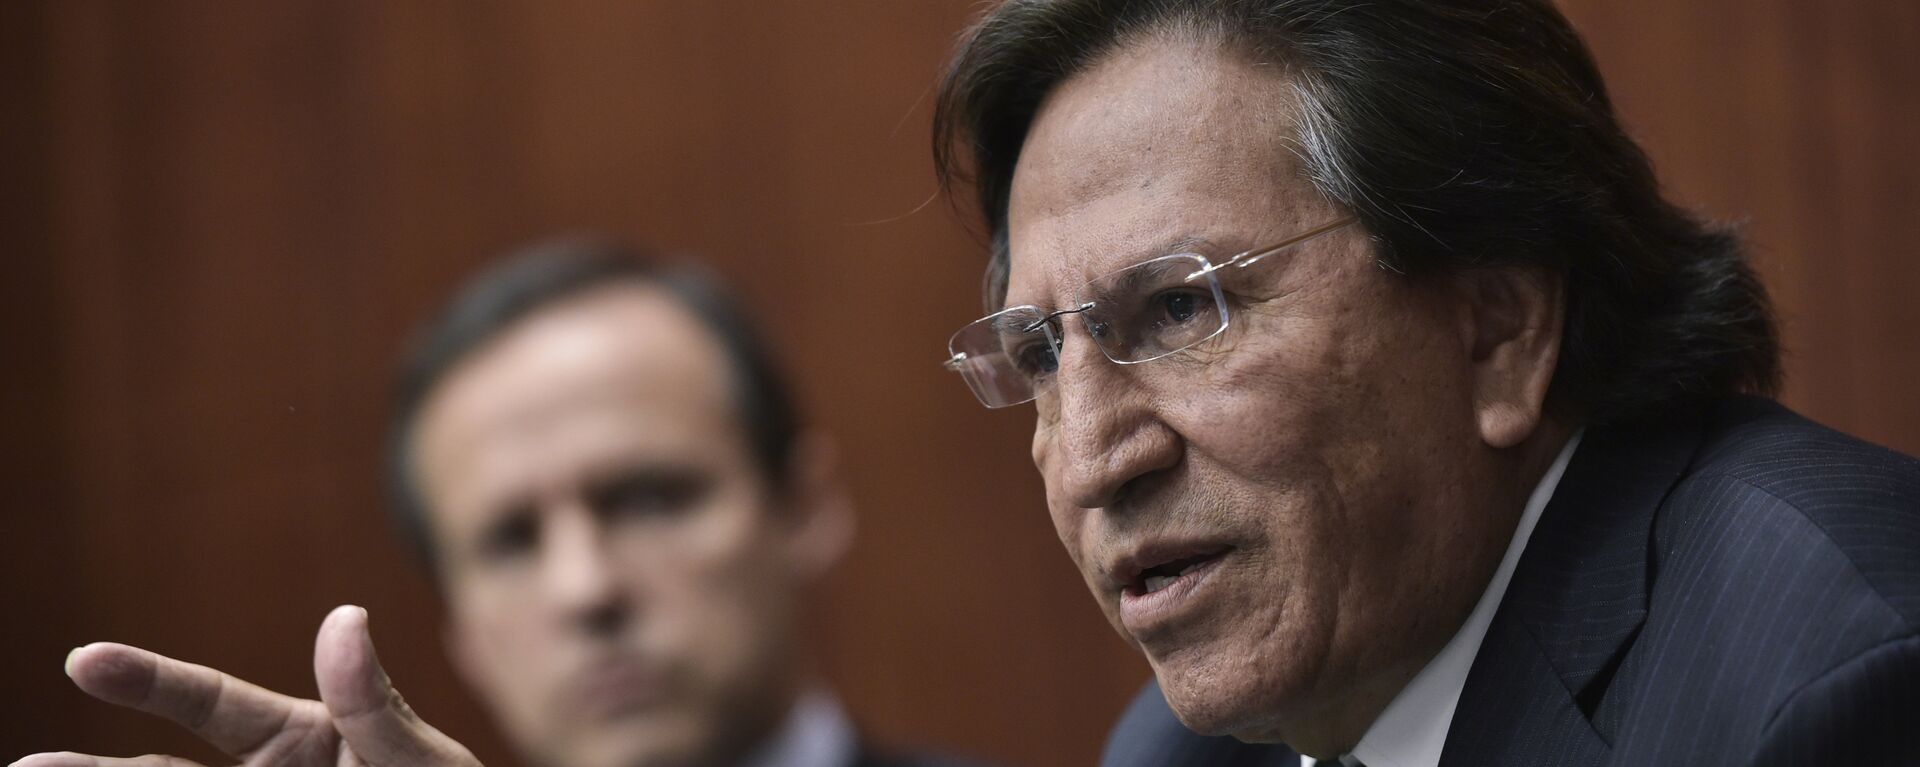 Former President of Peru Alejandro Toledo (R) speaks, watched by former President of Bolivia Jorge Quiroga (L), during a discussion on Venezuela and the OAS at The Center for Strategic and International Studies (CSIS) on June 17, 2016 in Washington, DC.  - Sputnik Mundo, 1920, 31.08.2022